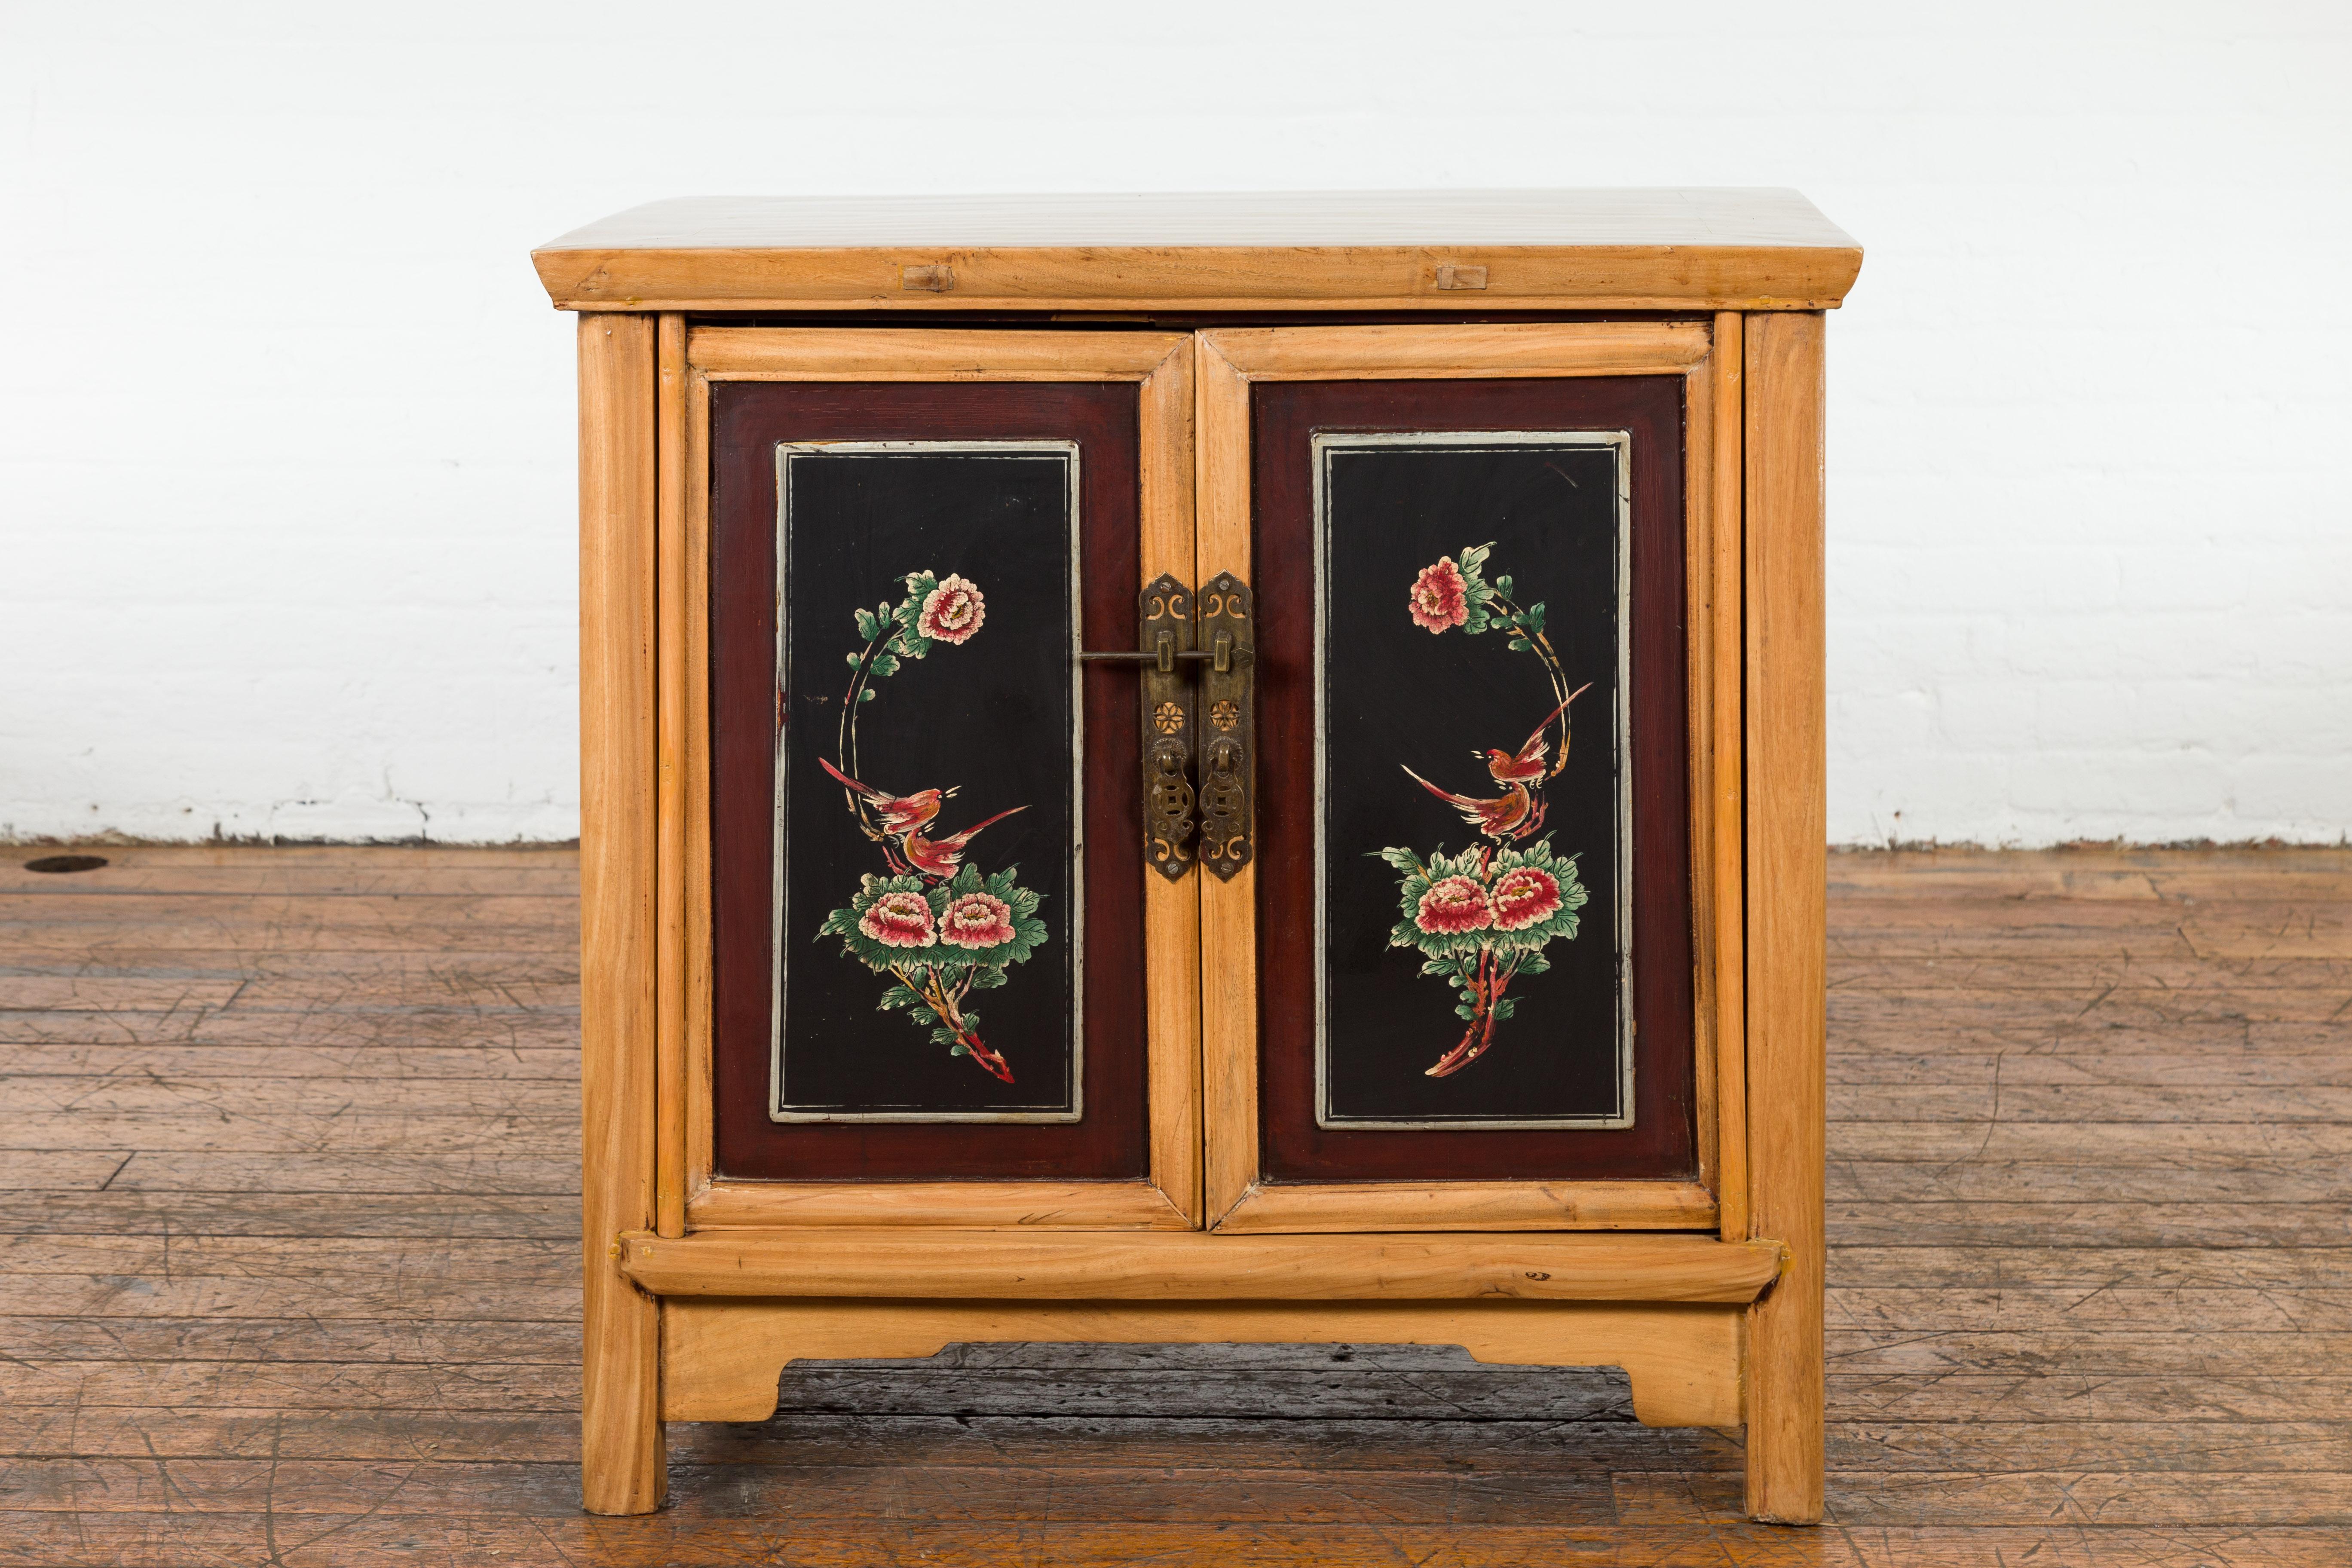 A Chinese late Qing Dynasty period side cabinet from the early 20th century, with hand painted flower and bird décor, two doors, ornate brass hardware, carved apron and custom lacquer. Created in China during the late Qing Dynasty period in the